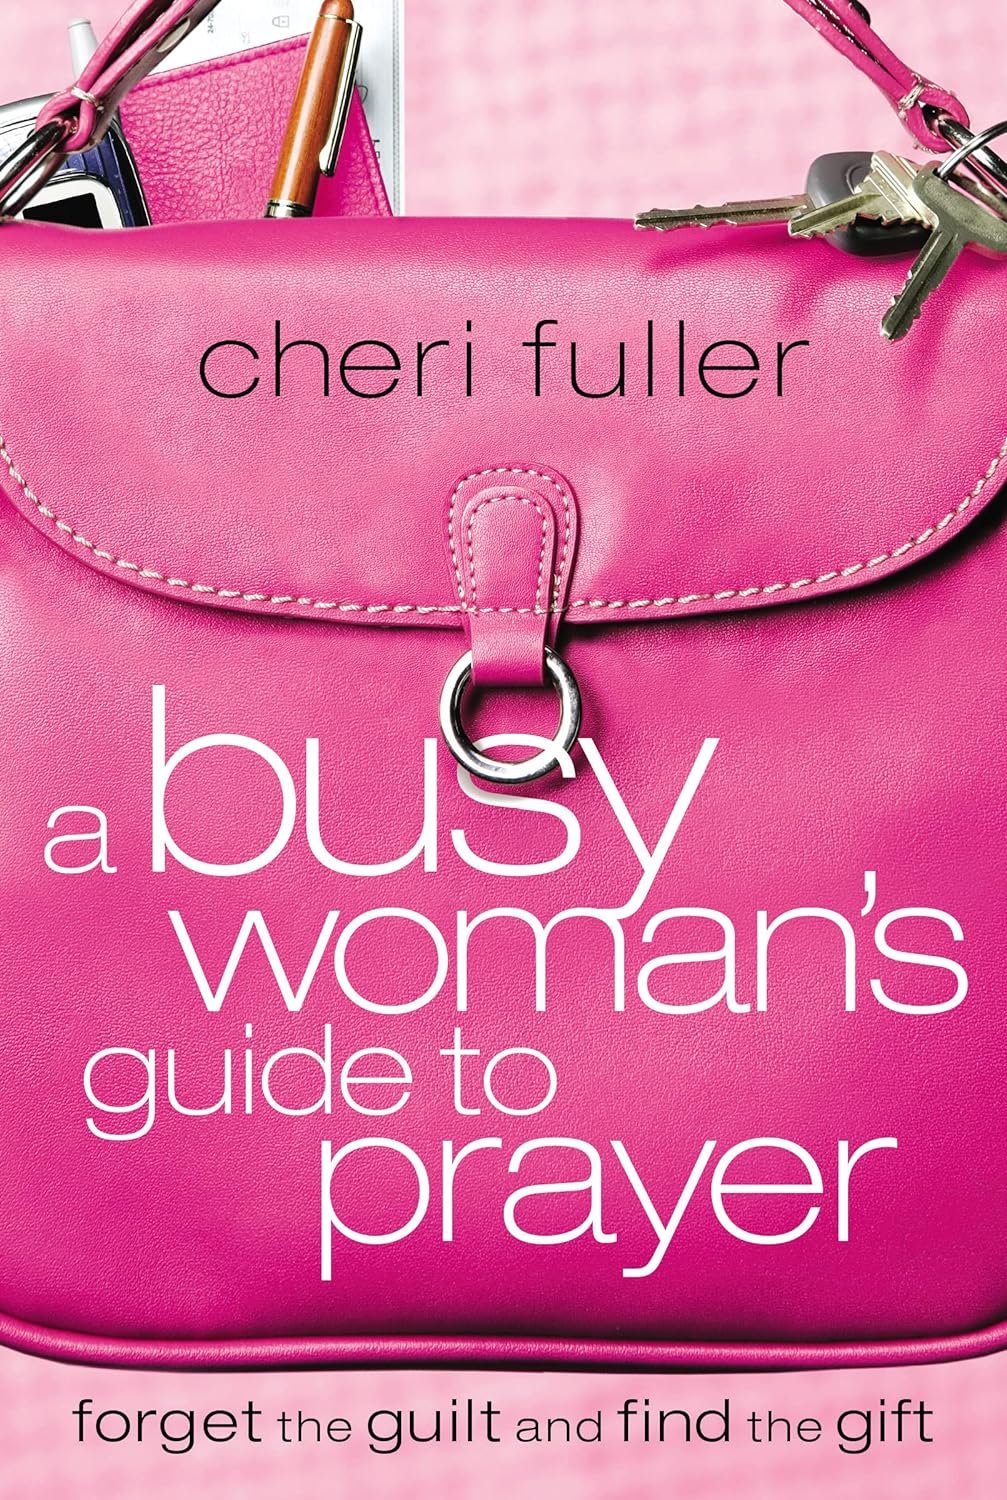 “Busy Woman's Guide to Prayer” - by Cheri Fuller